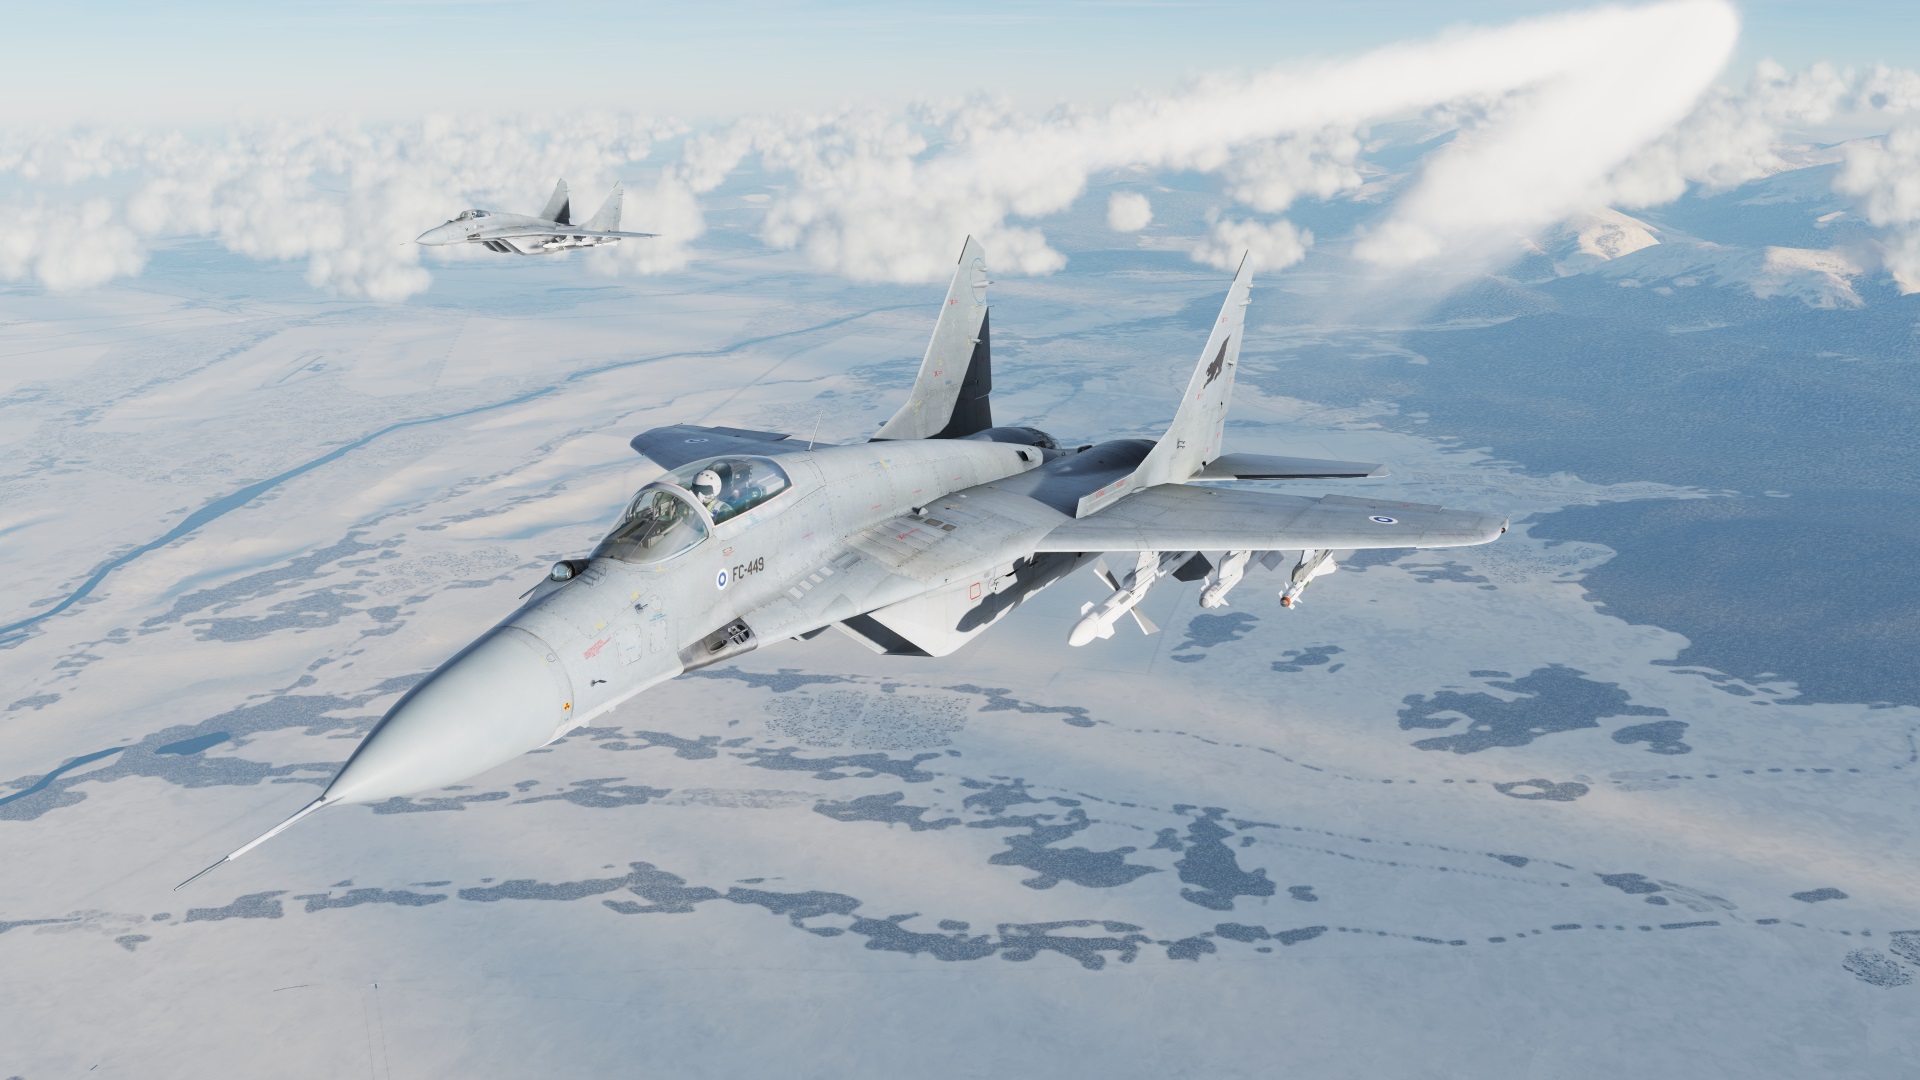 Finland Air Force Skin For MiG-29C (Fictional)